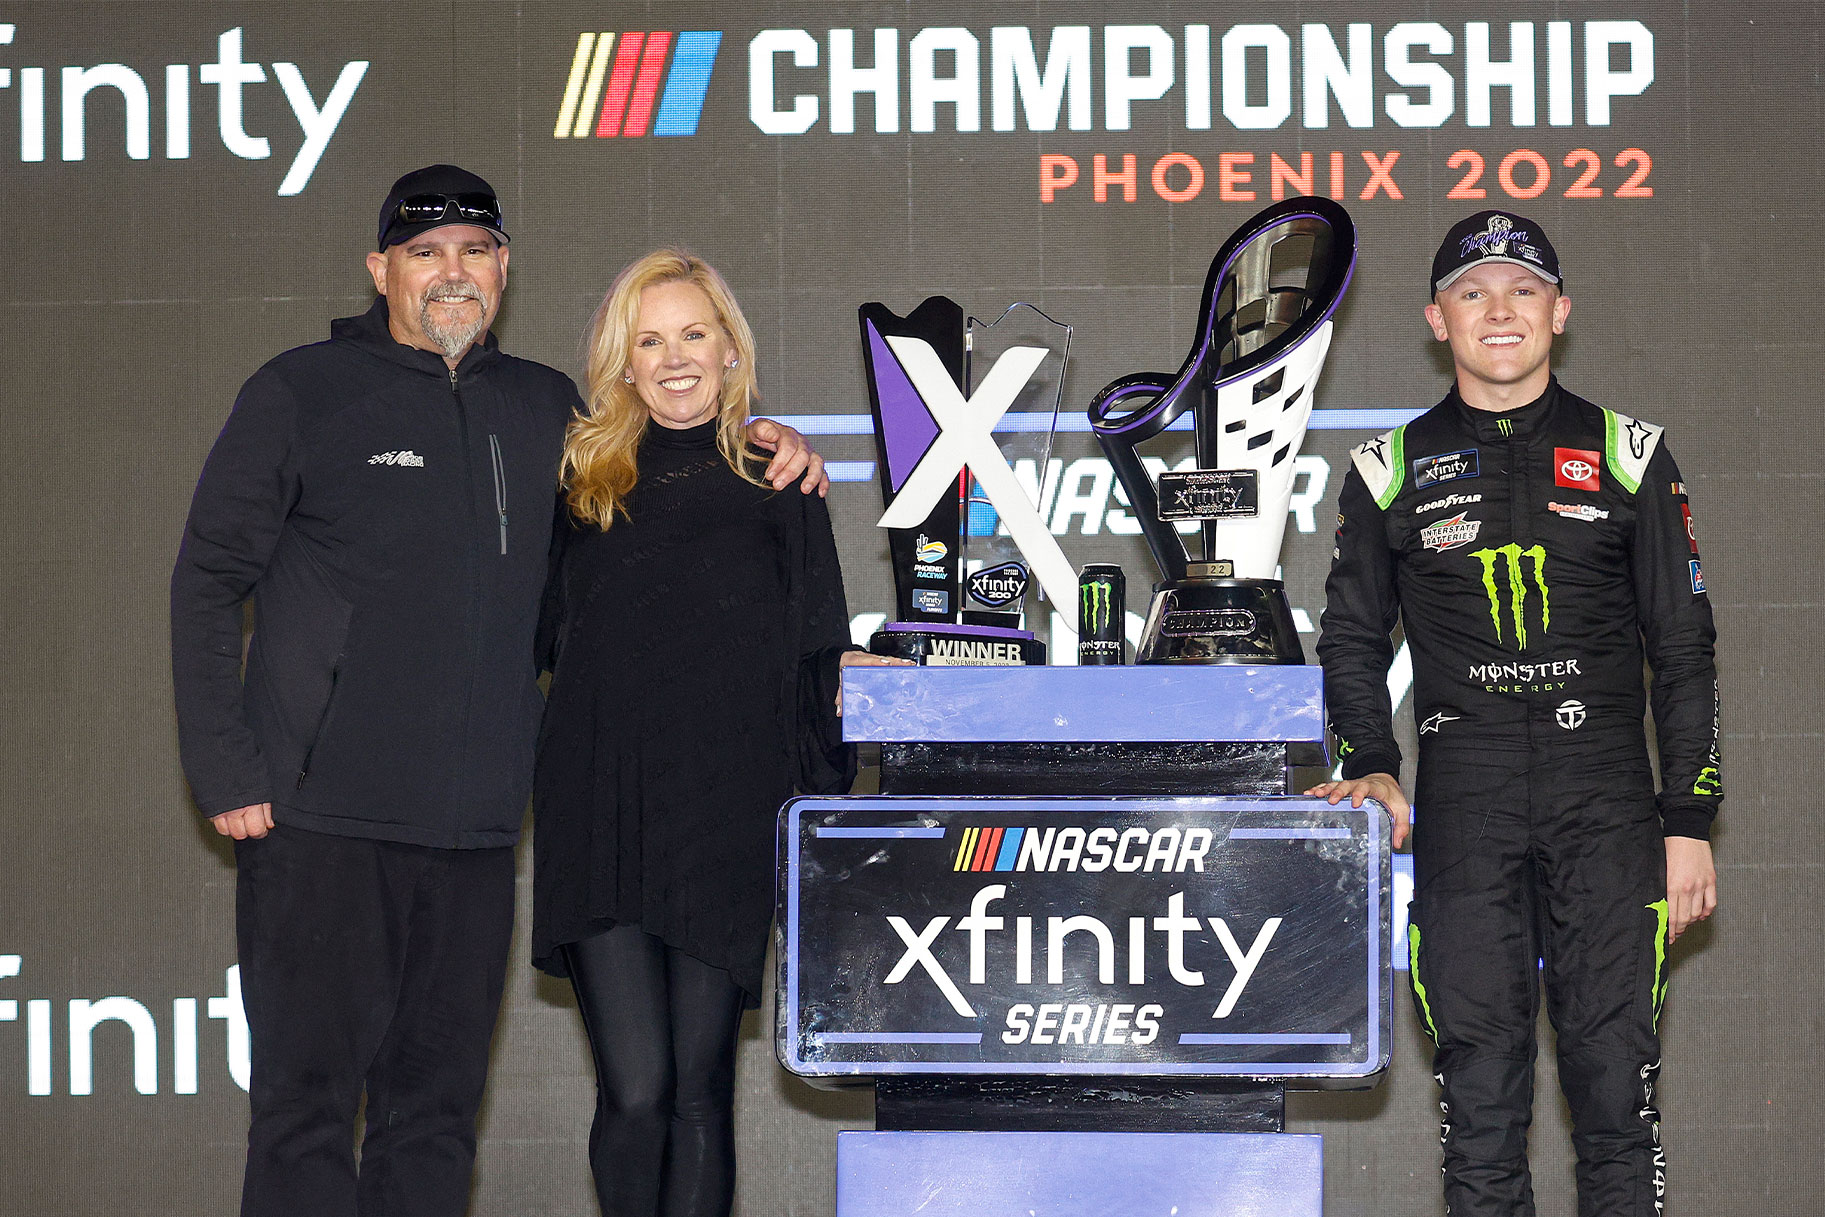 Ty Gibbs celebrates with his father, Coy Gibbs and mother, Heather Gibbs in victory lane after winning the NASCAR Xfinity Series Championship